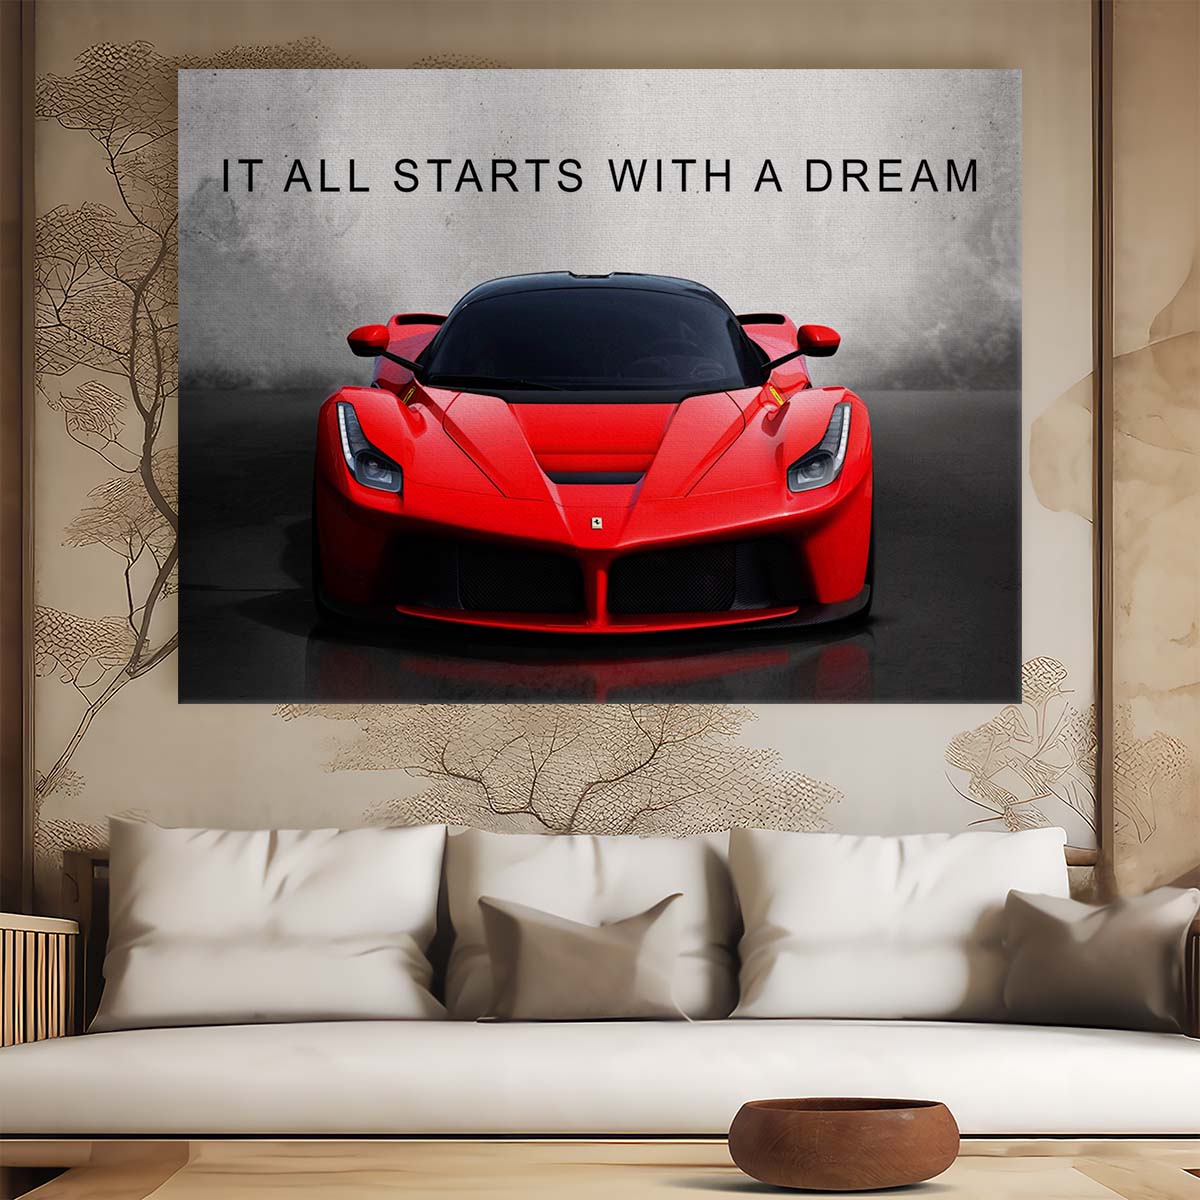 It All Starts With A Dream Wall Art by Luxuriance Designs. Made in USA.